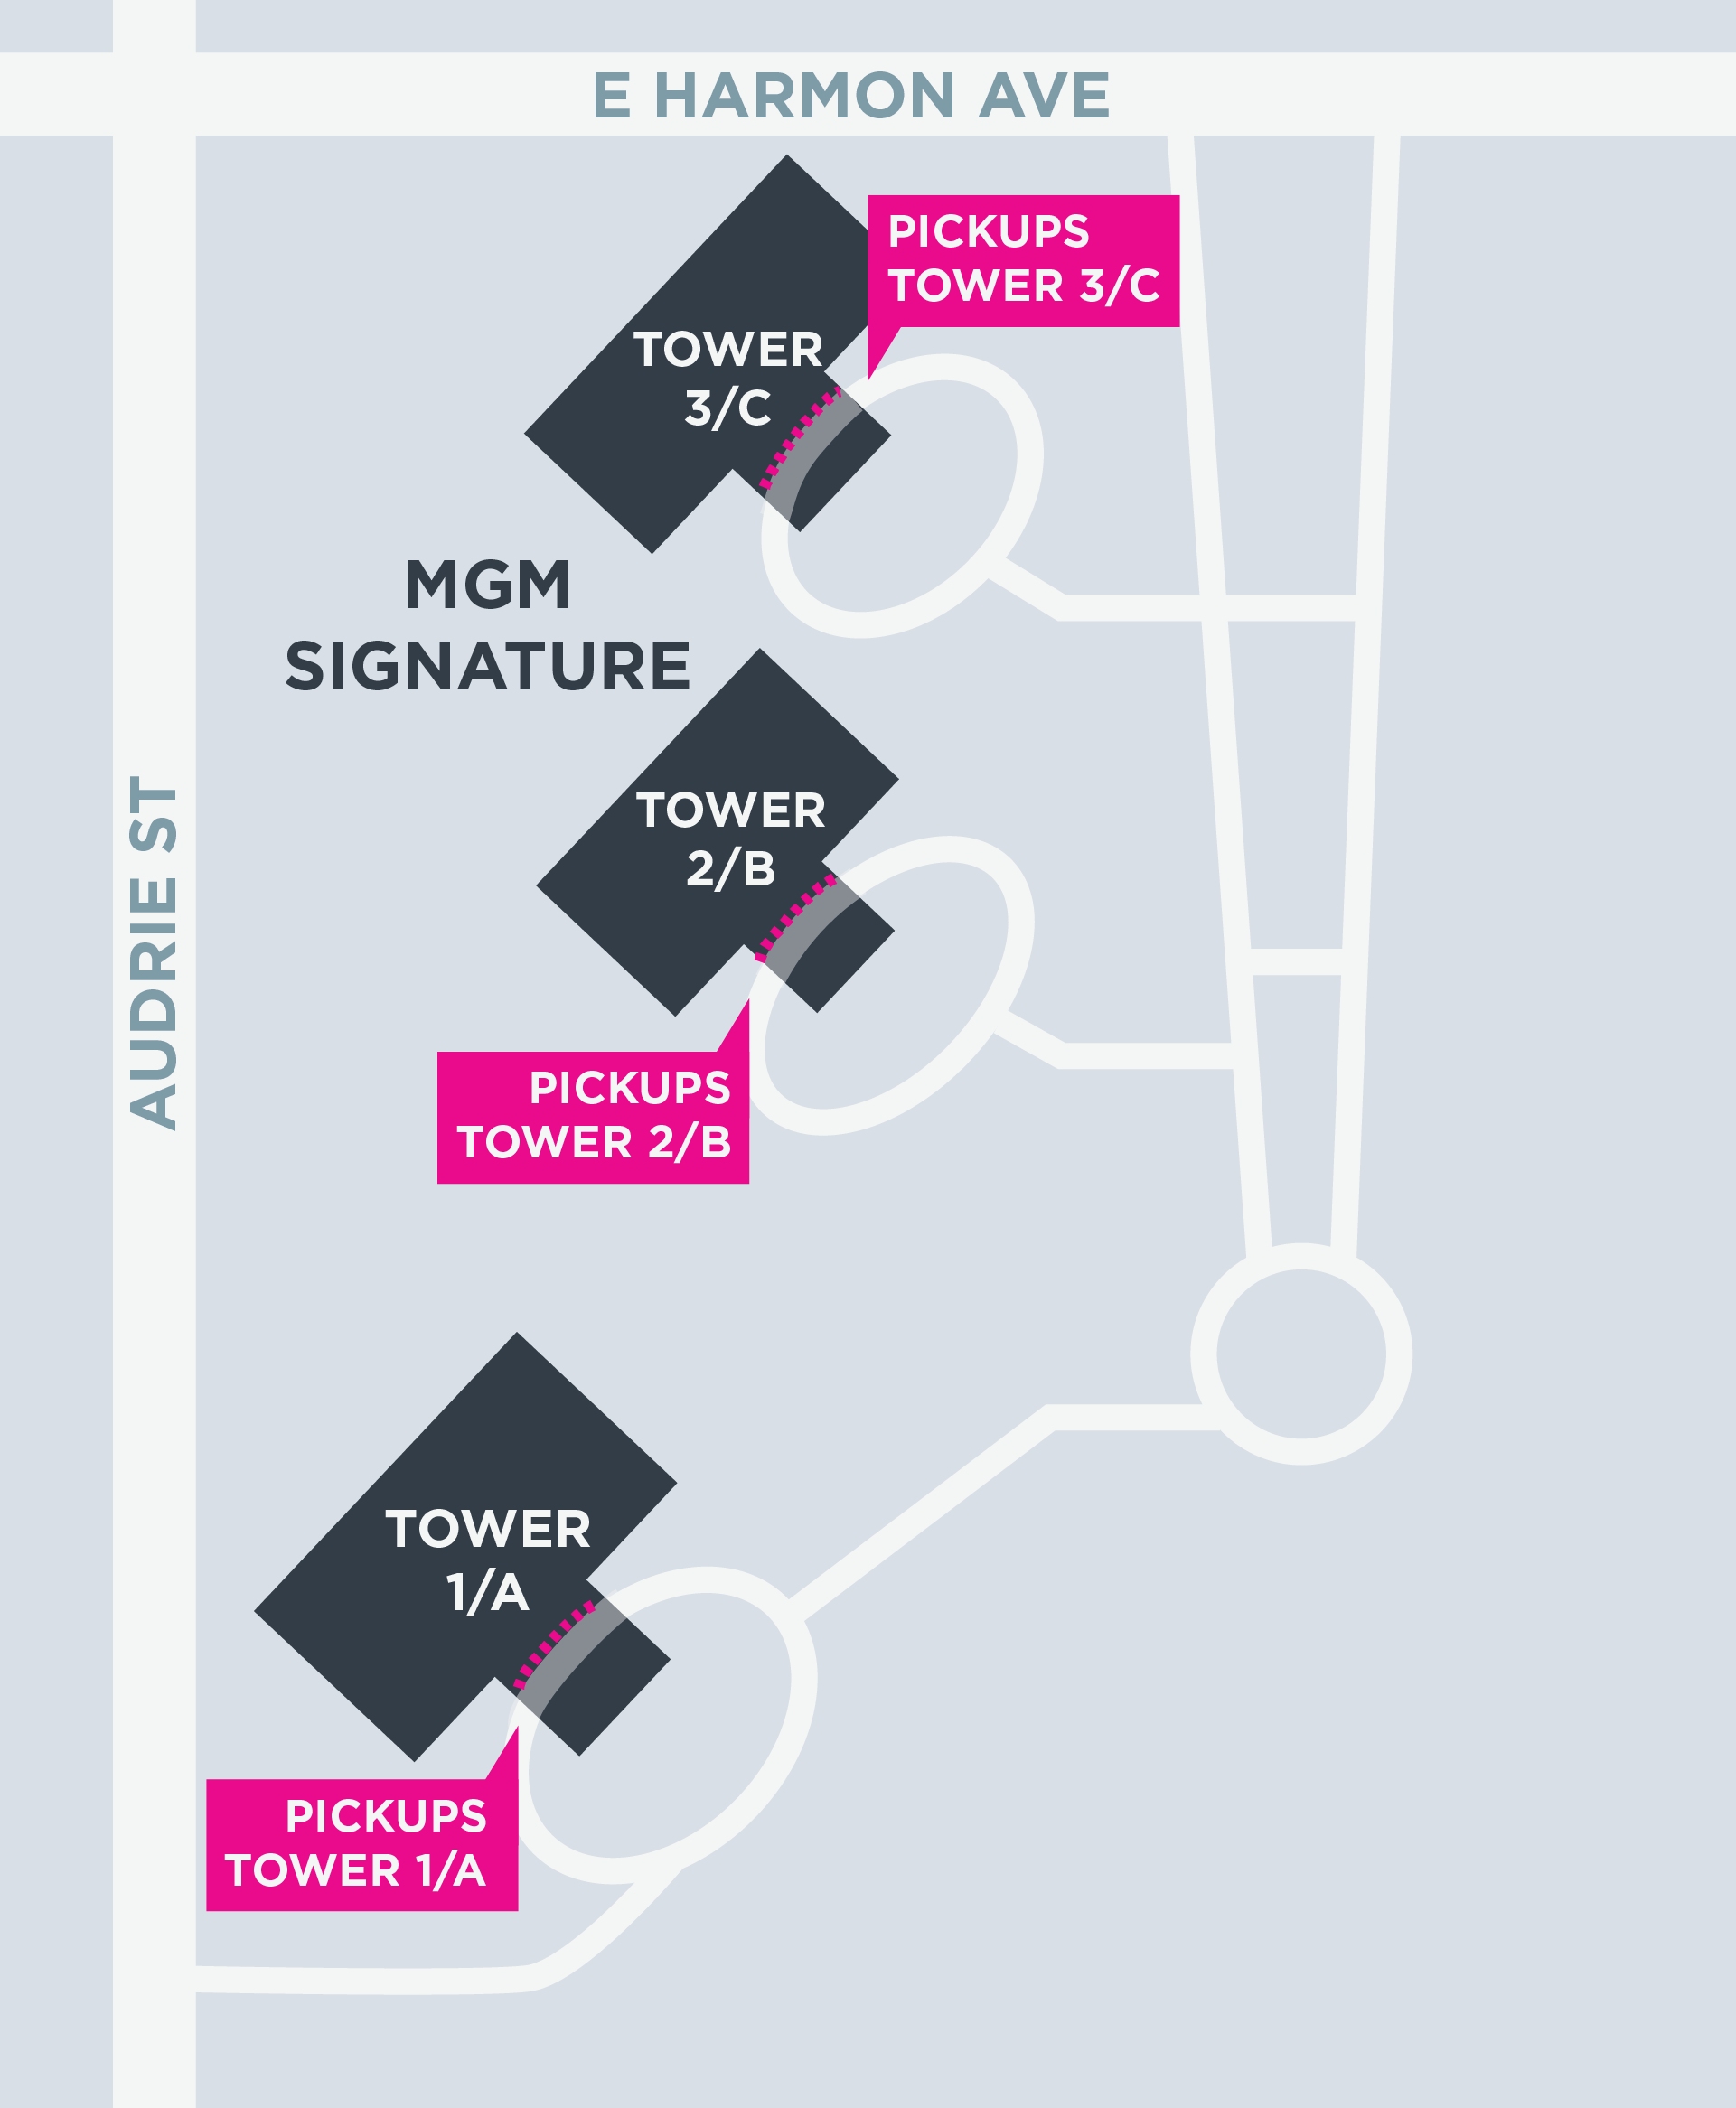 Map of pickup and drop-off areas at the MGM Signature in Las Vegas.